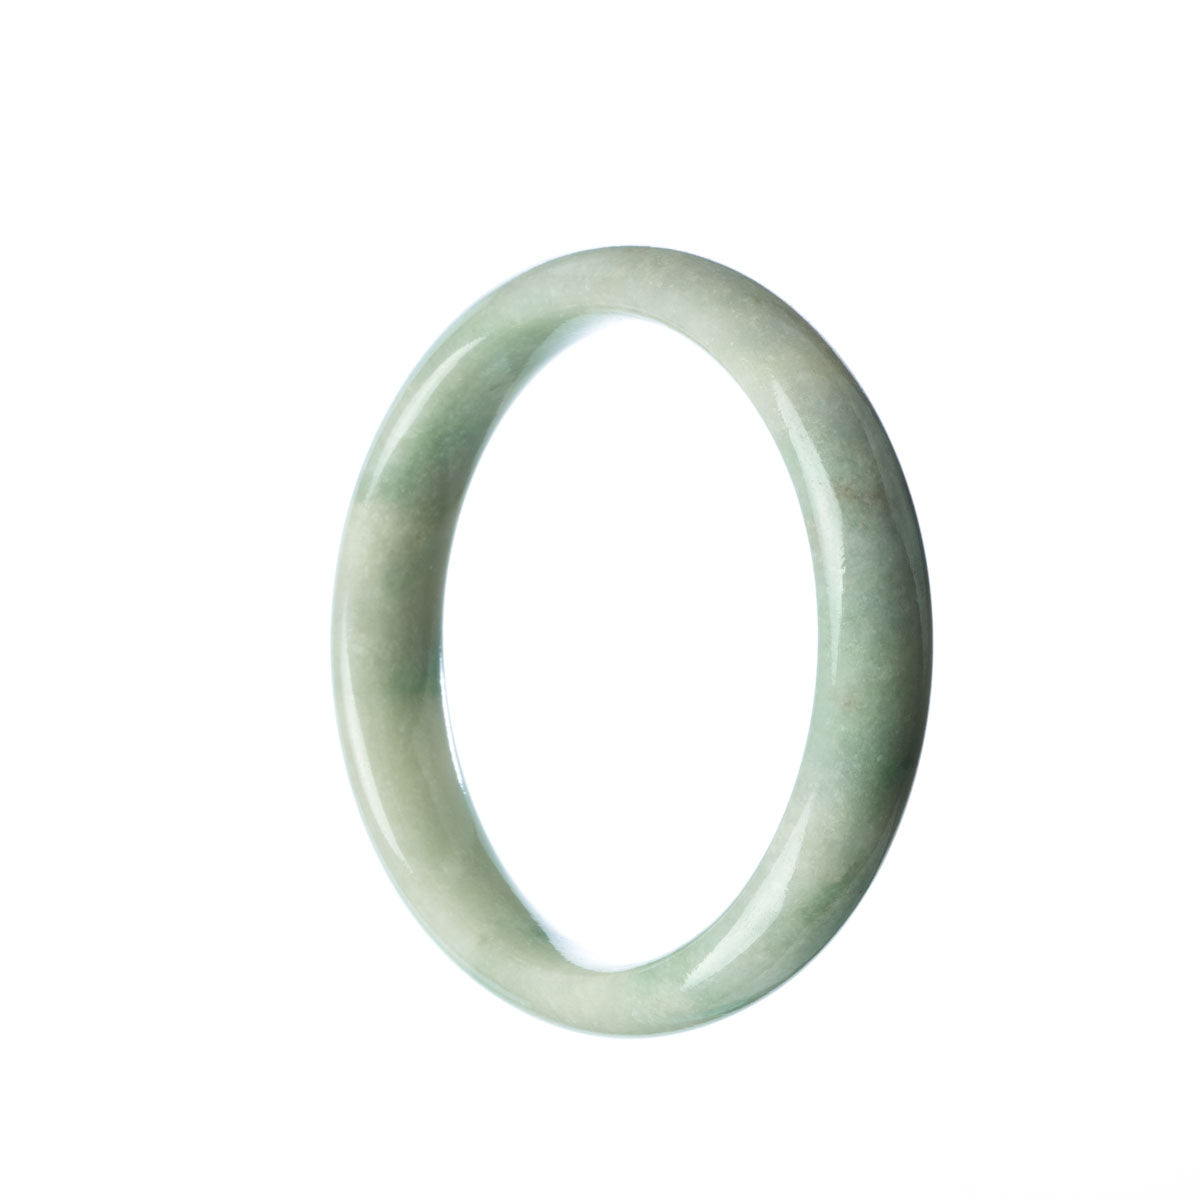 A pale green traditional jade bangle with a half-moon shape, showcasing its authentic and natural beauty.